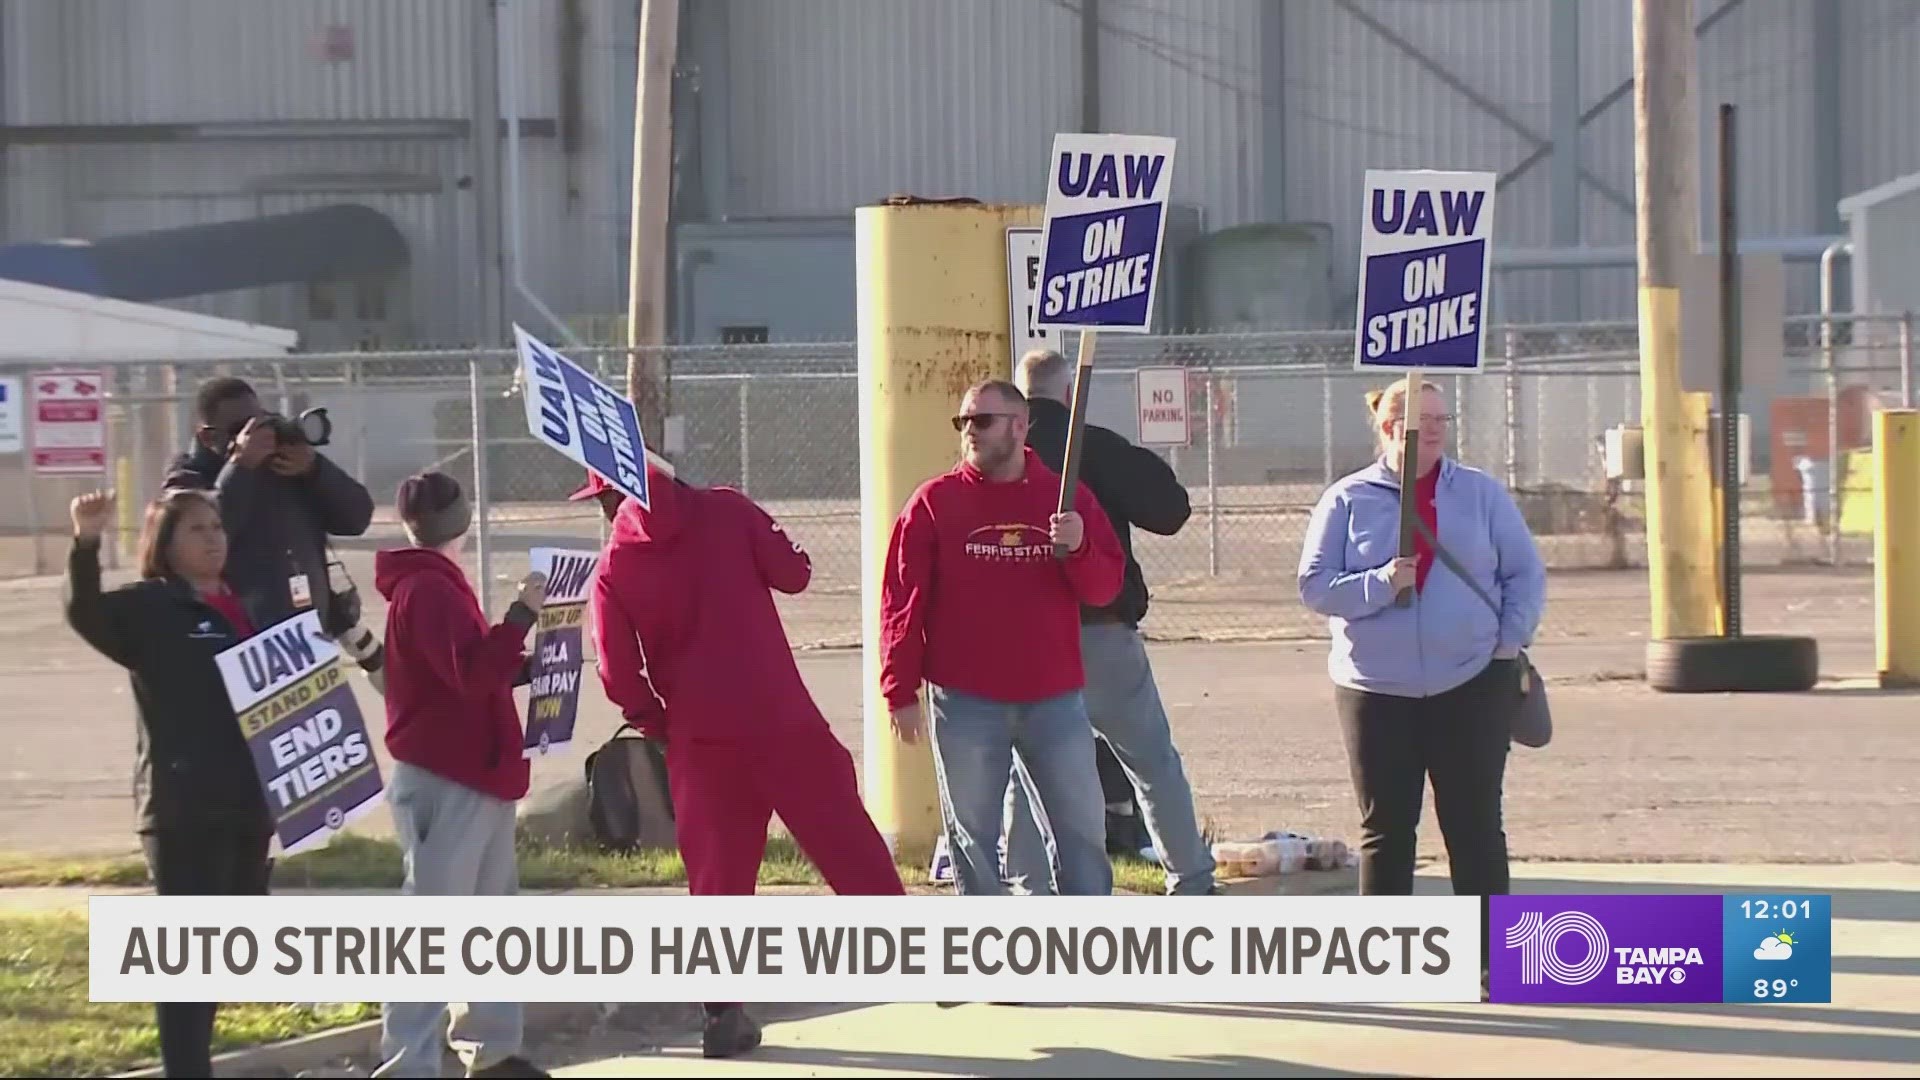 The United Auto Workers union is asking for salary raises and better benefits.